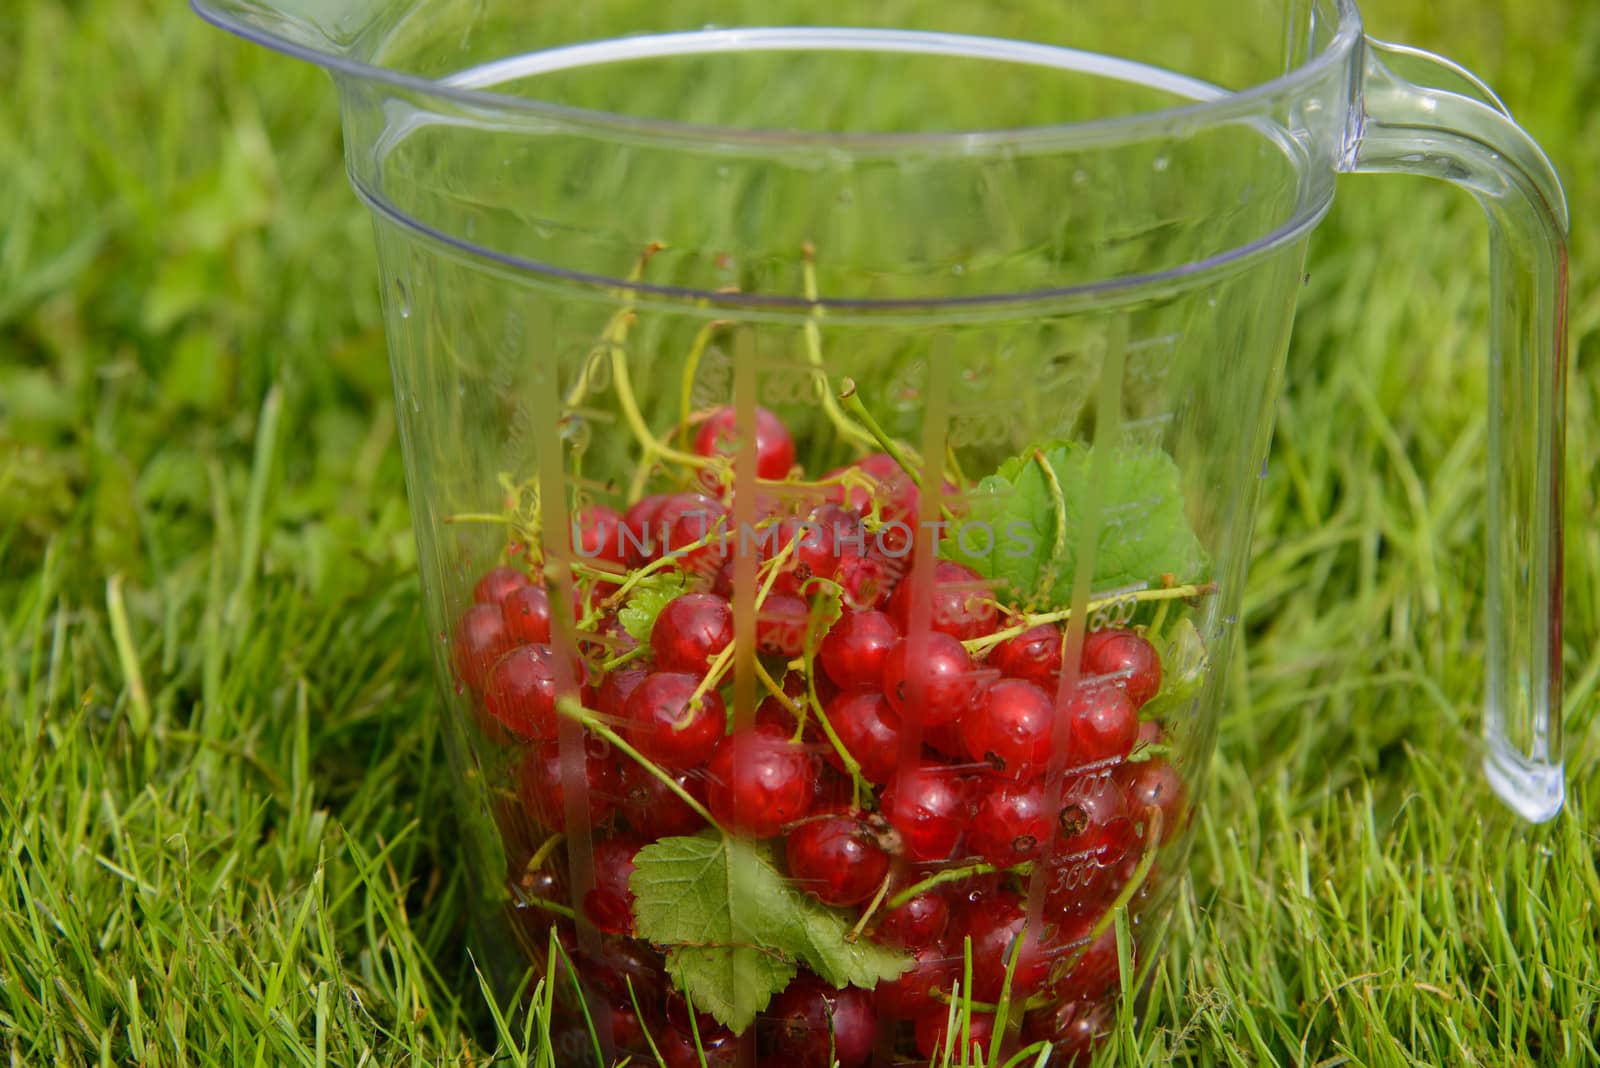 Red currants in a measuring cup